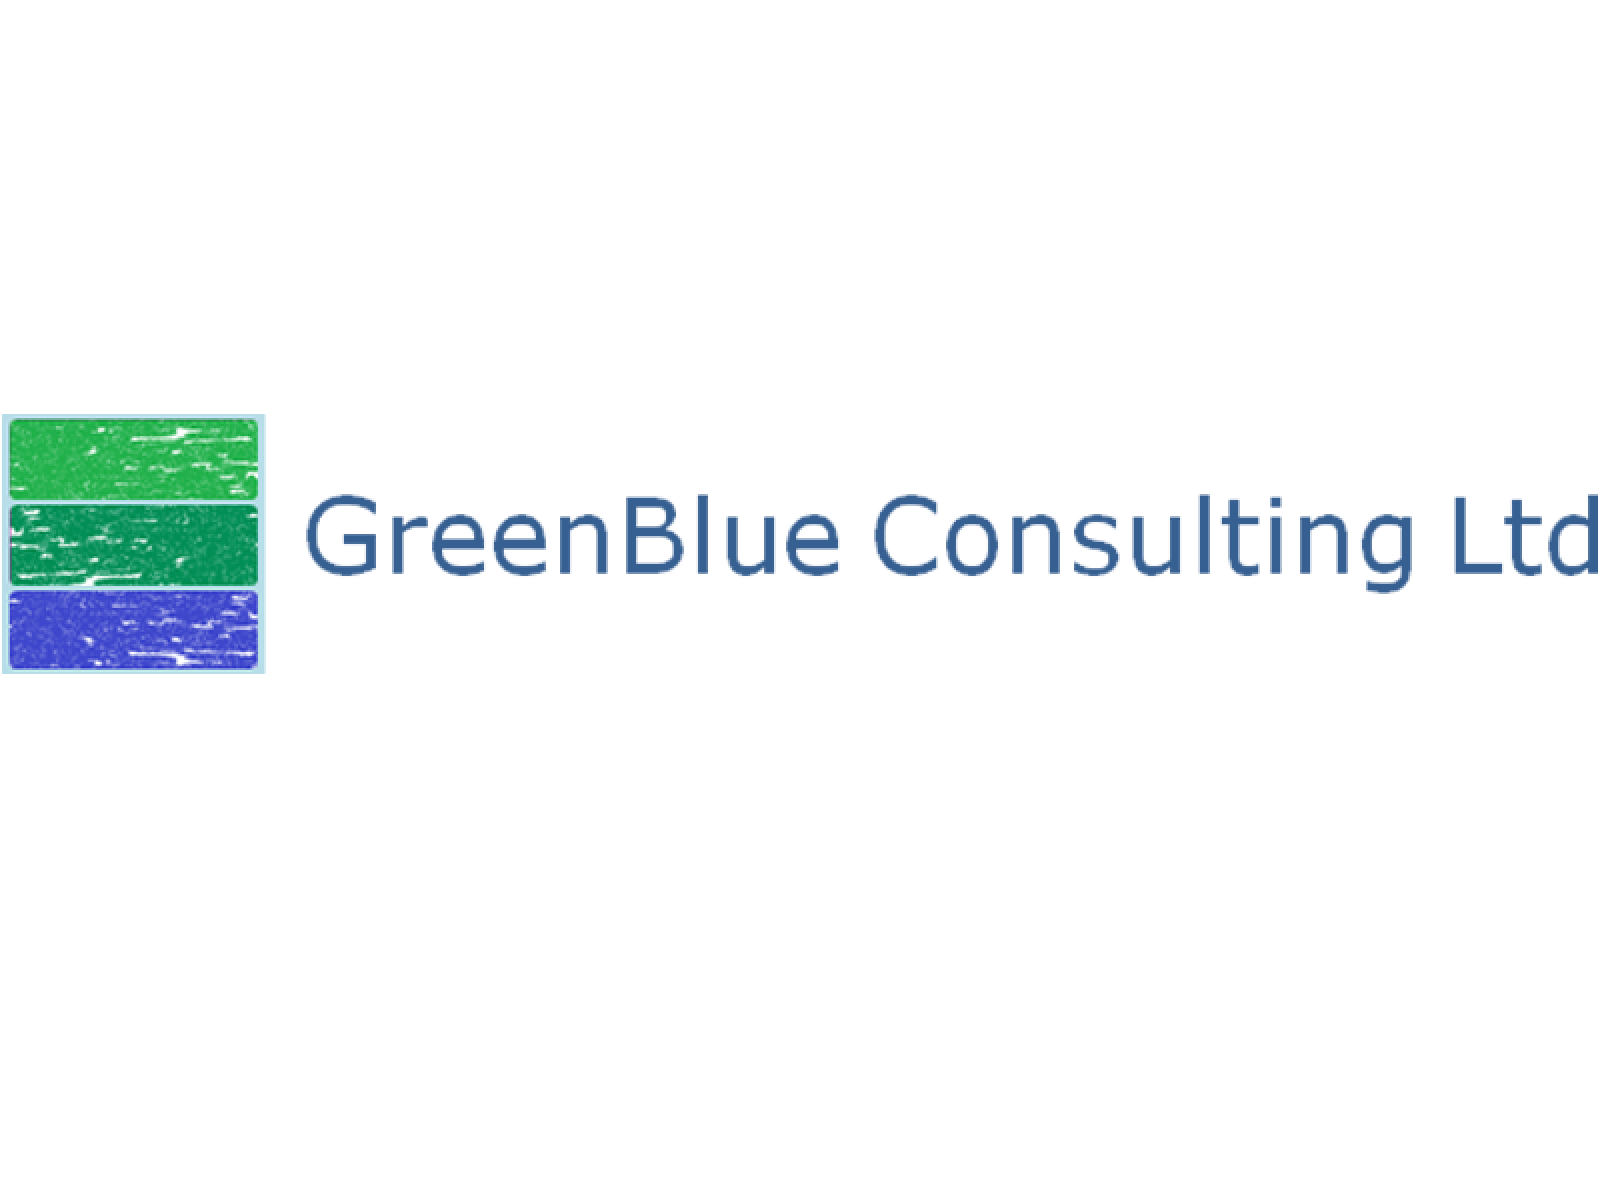 Green Blus Consulting